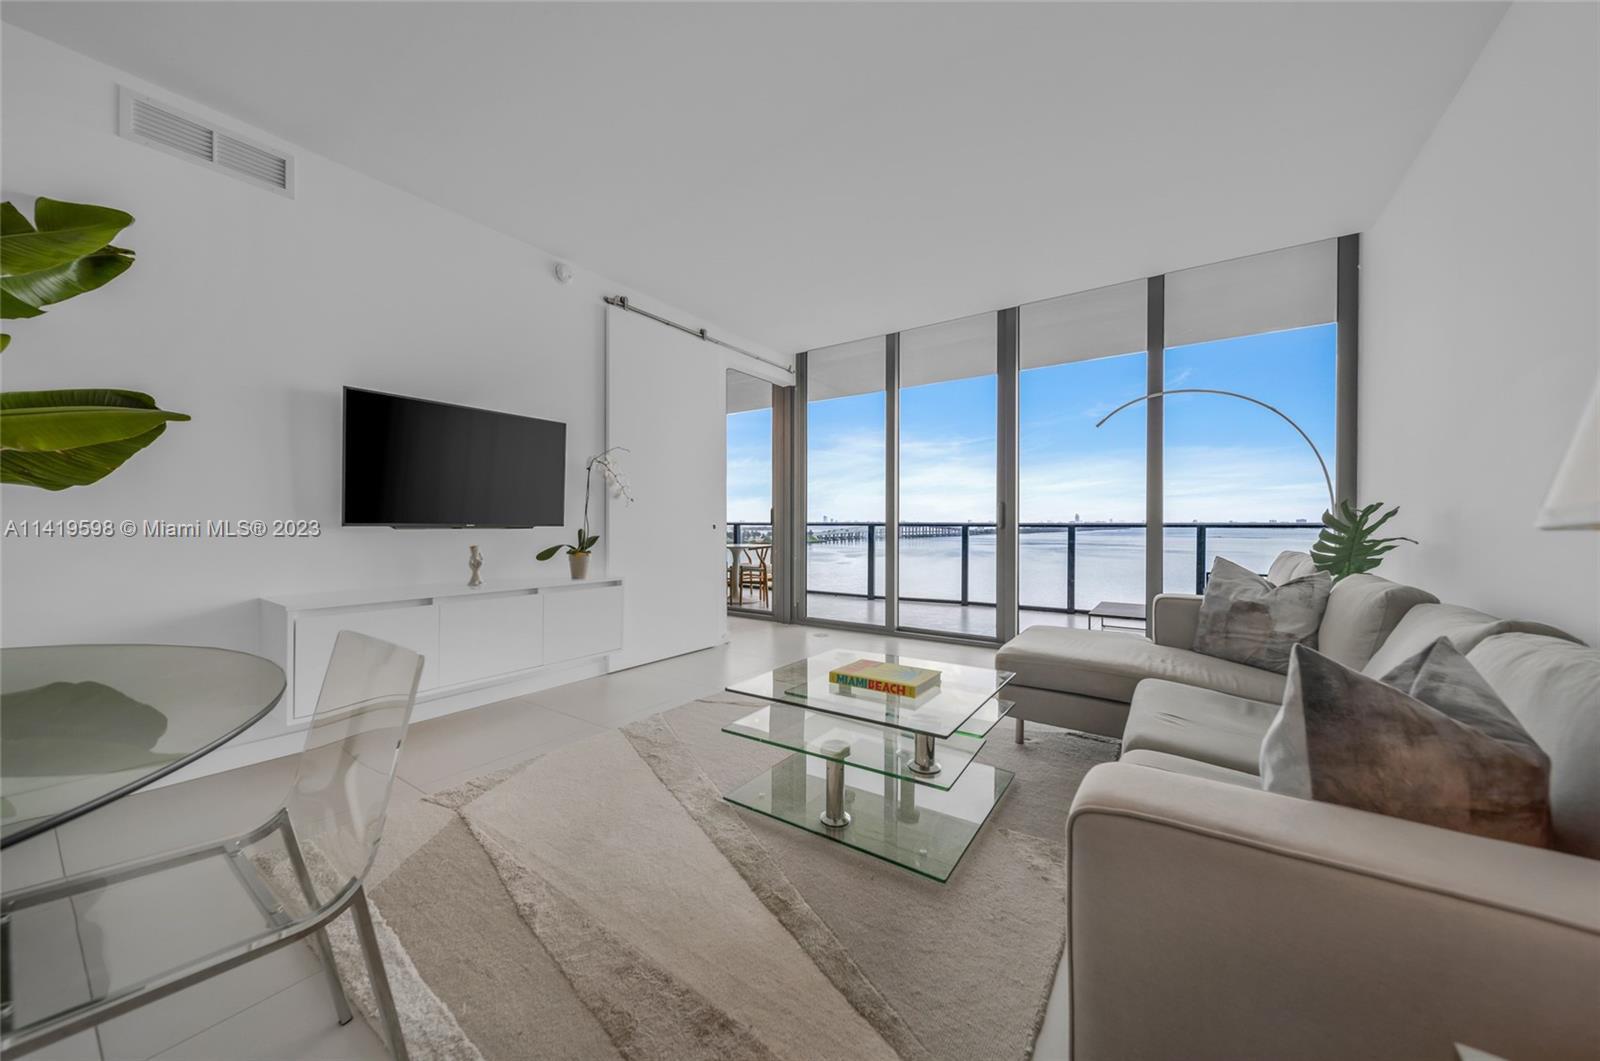 Gorgeous 1 bed plus den/1.5 bath condo in the Heart of Edgewater has a multi-million dollar, unobstr